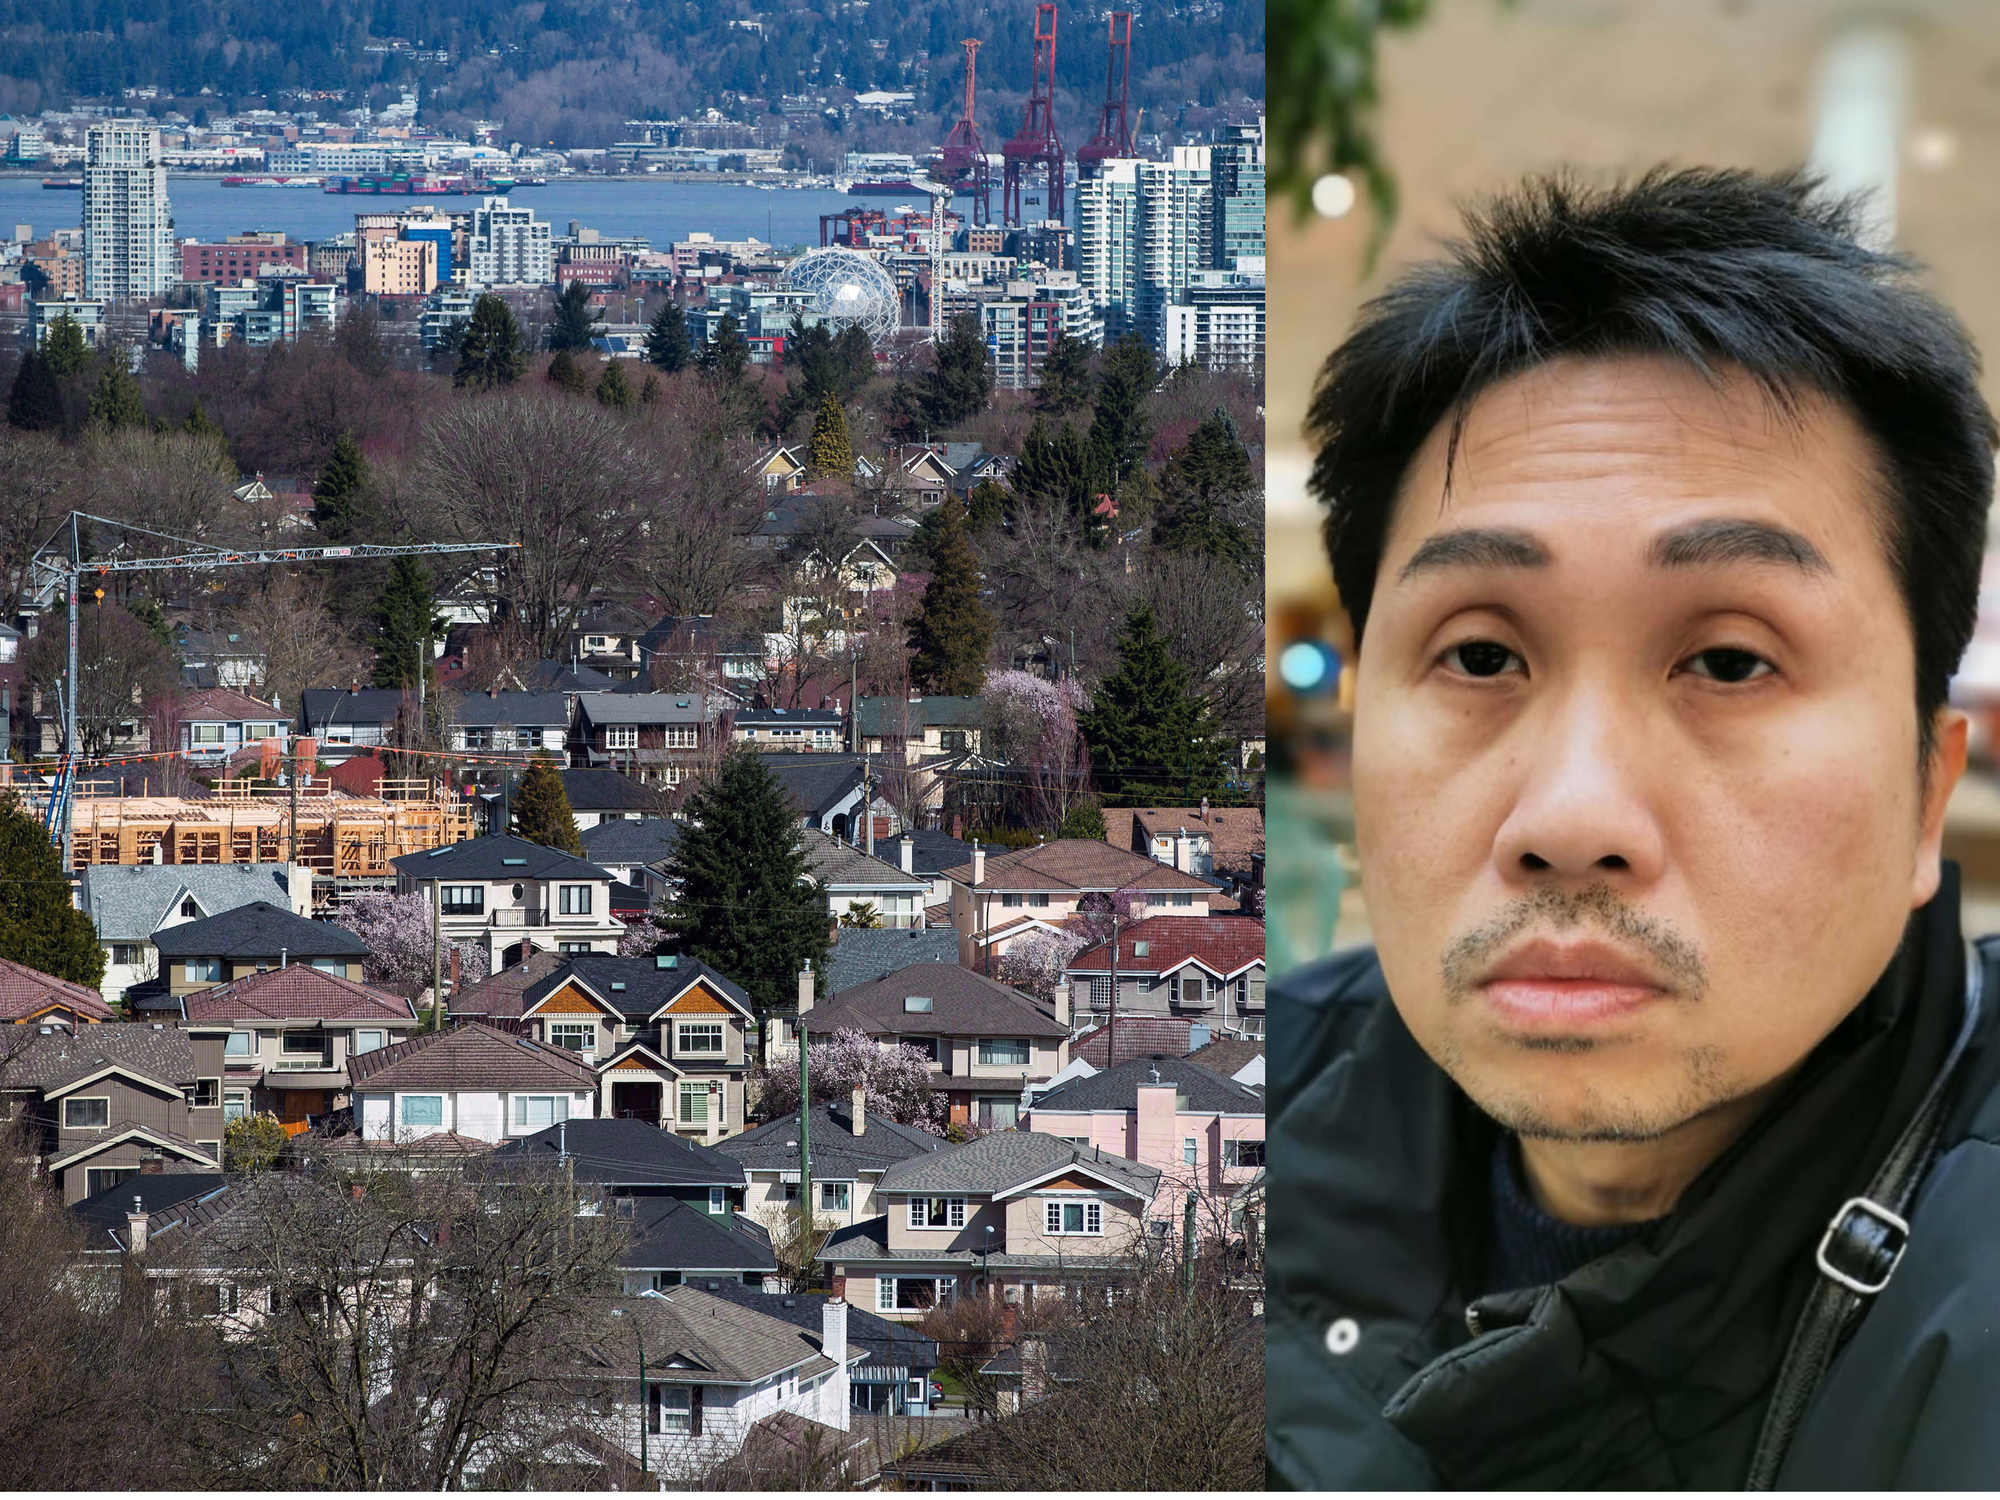 Composite image shows Vancouver skyline with single family homes in the foreground overlaid by photo of Hon Kit Chung.